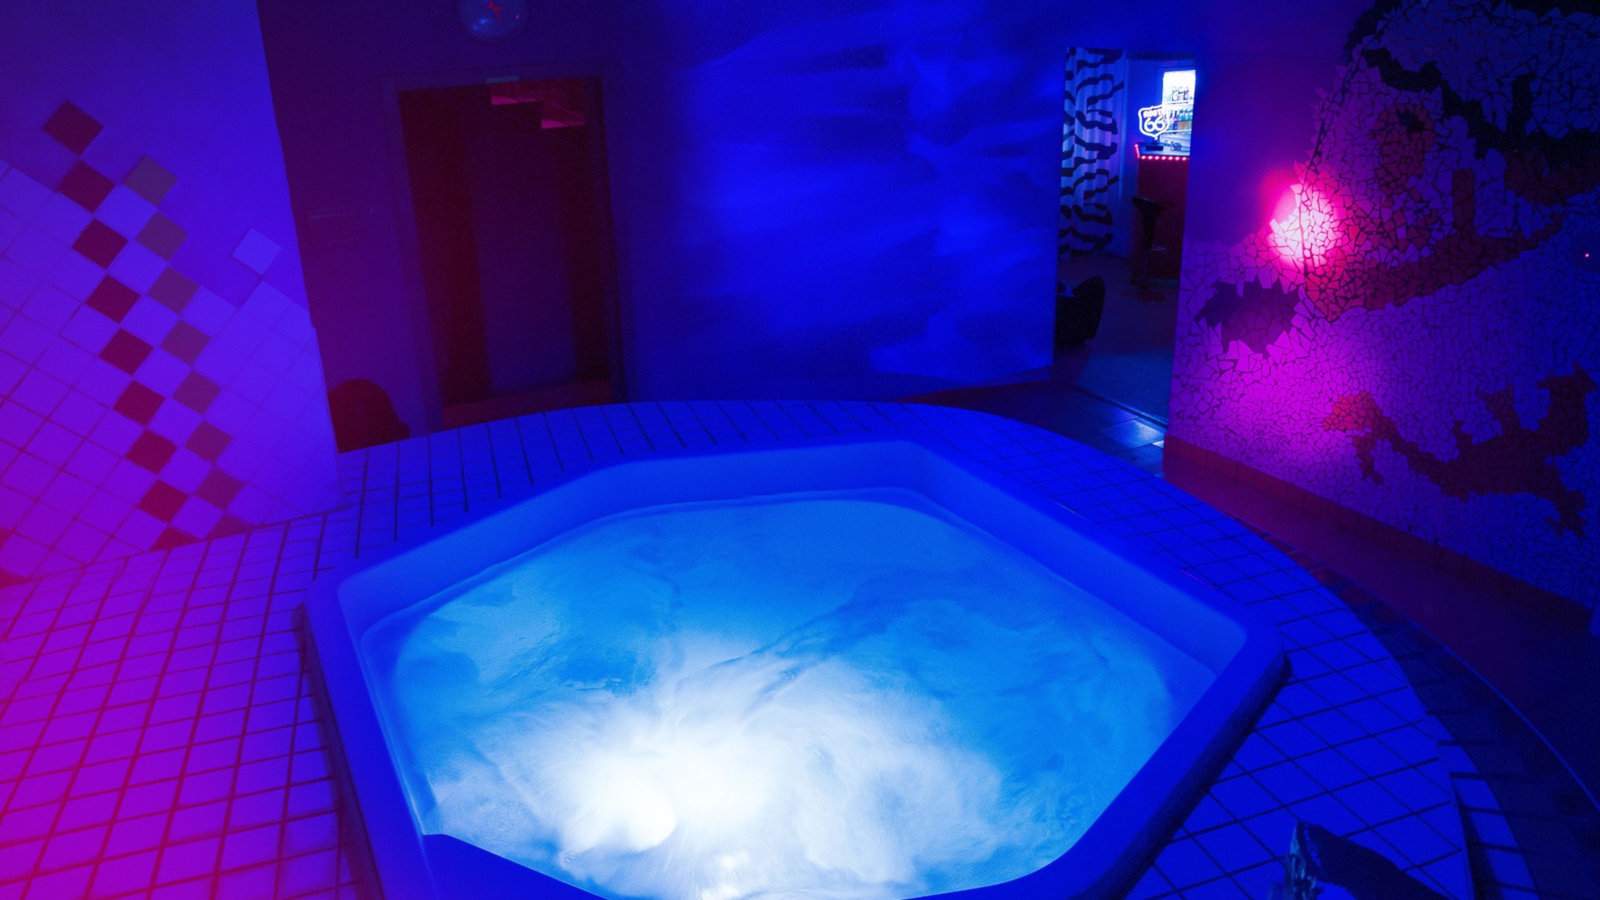 Club Aqua is a fun gay sauna in Miami with some very atmospheric lighting